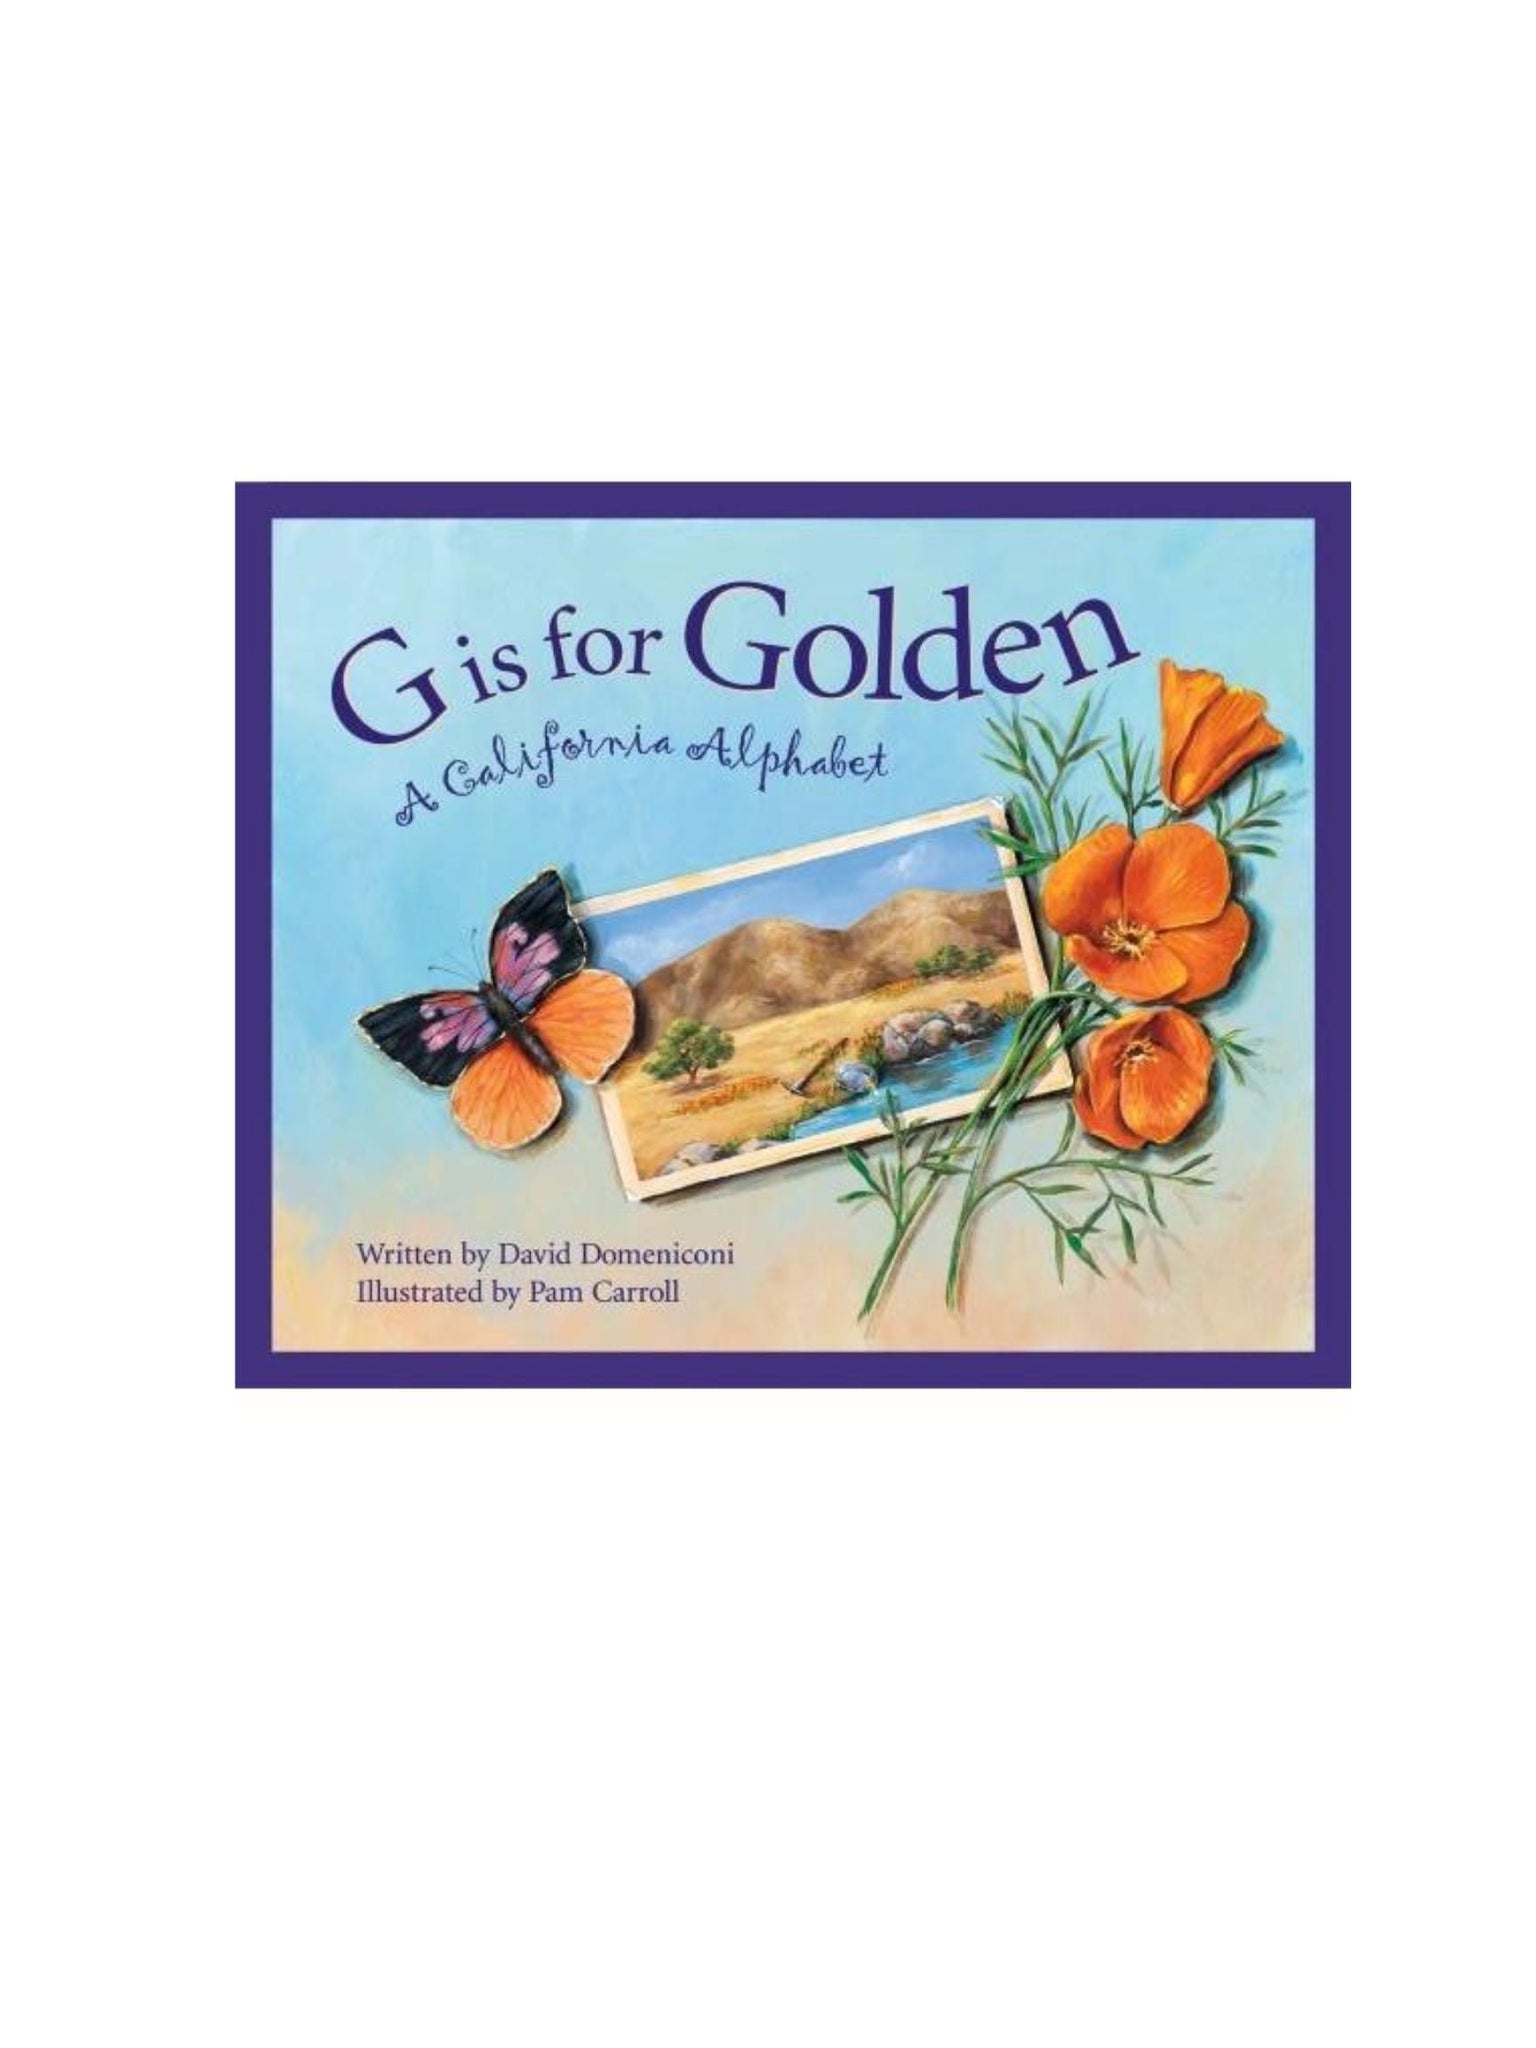 g is for golden - book about california